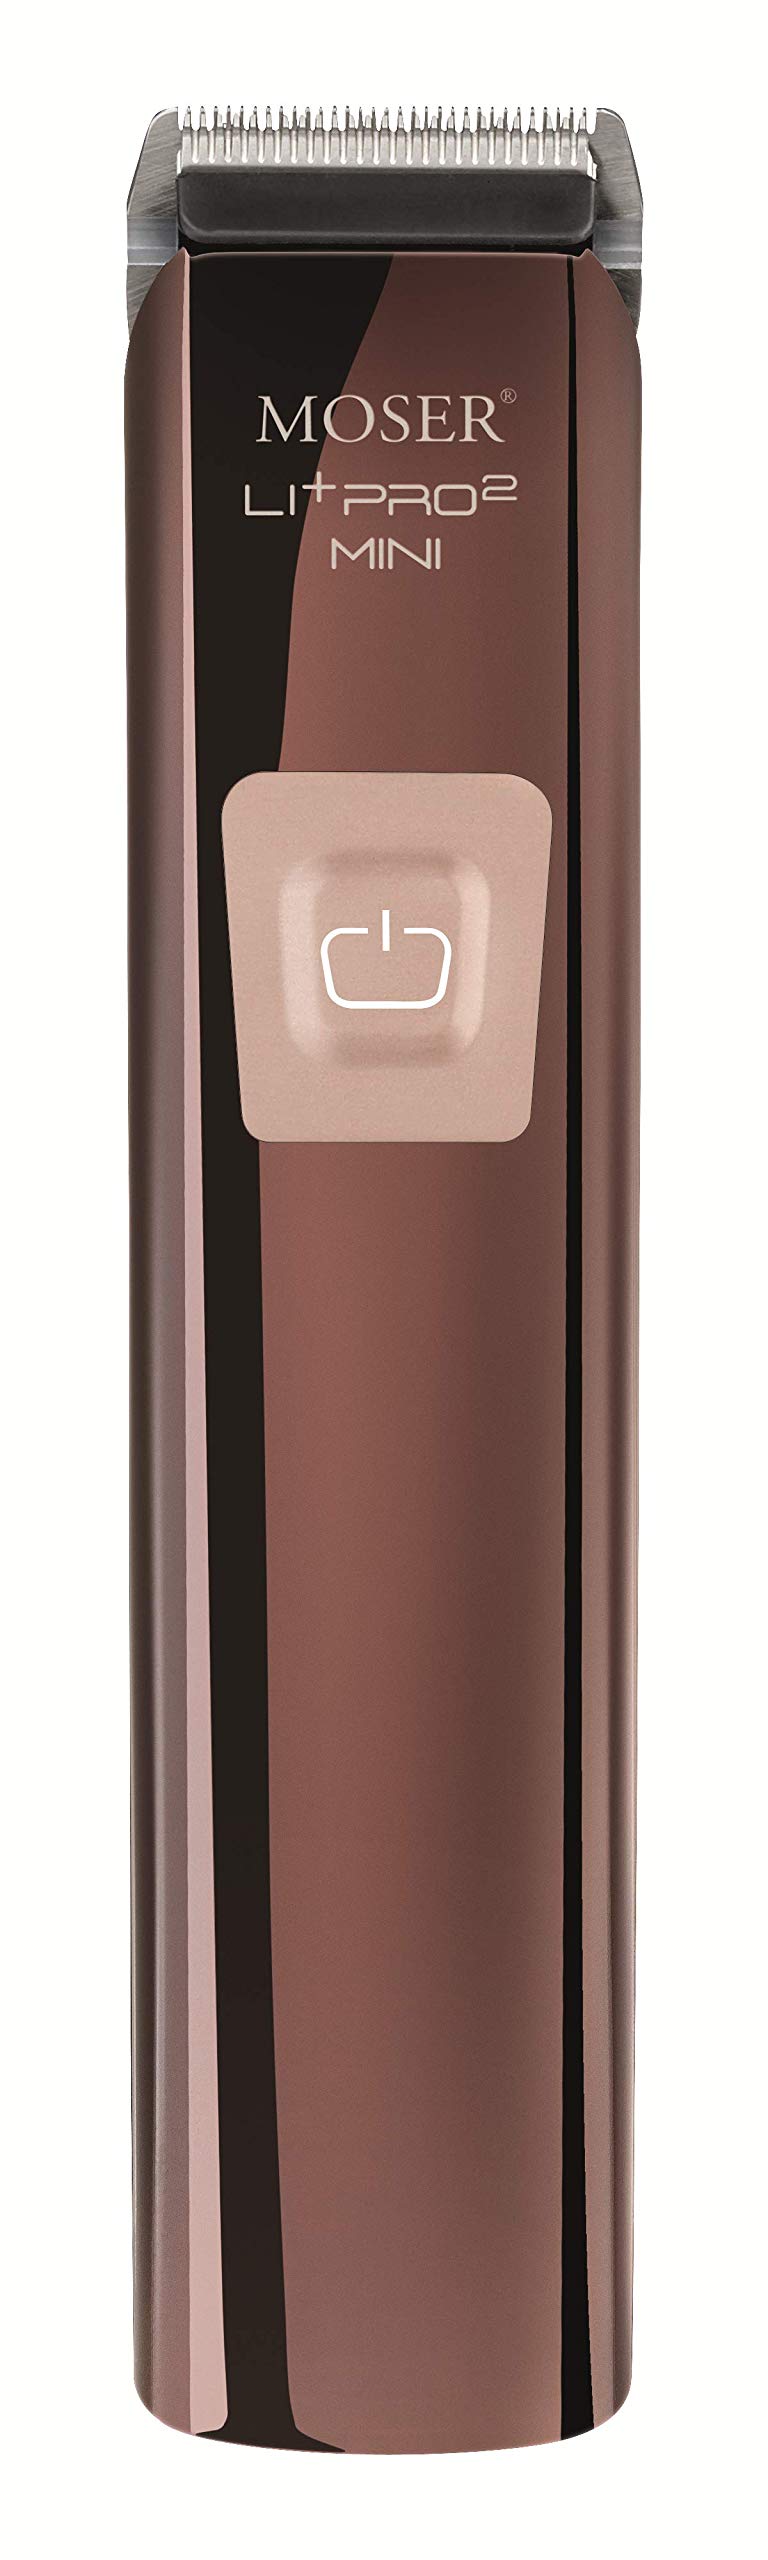 MOSER Li+Pro2 mini professional cord/cordless electric hair trimmer, 80 min quick charge, 120 minutes run time, 3-speed levels, Intelligent push button with charging stand, 1588-0151, Metallic Brown